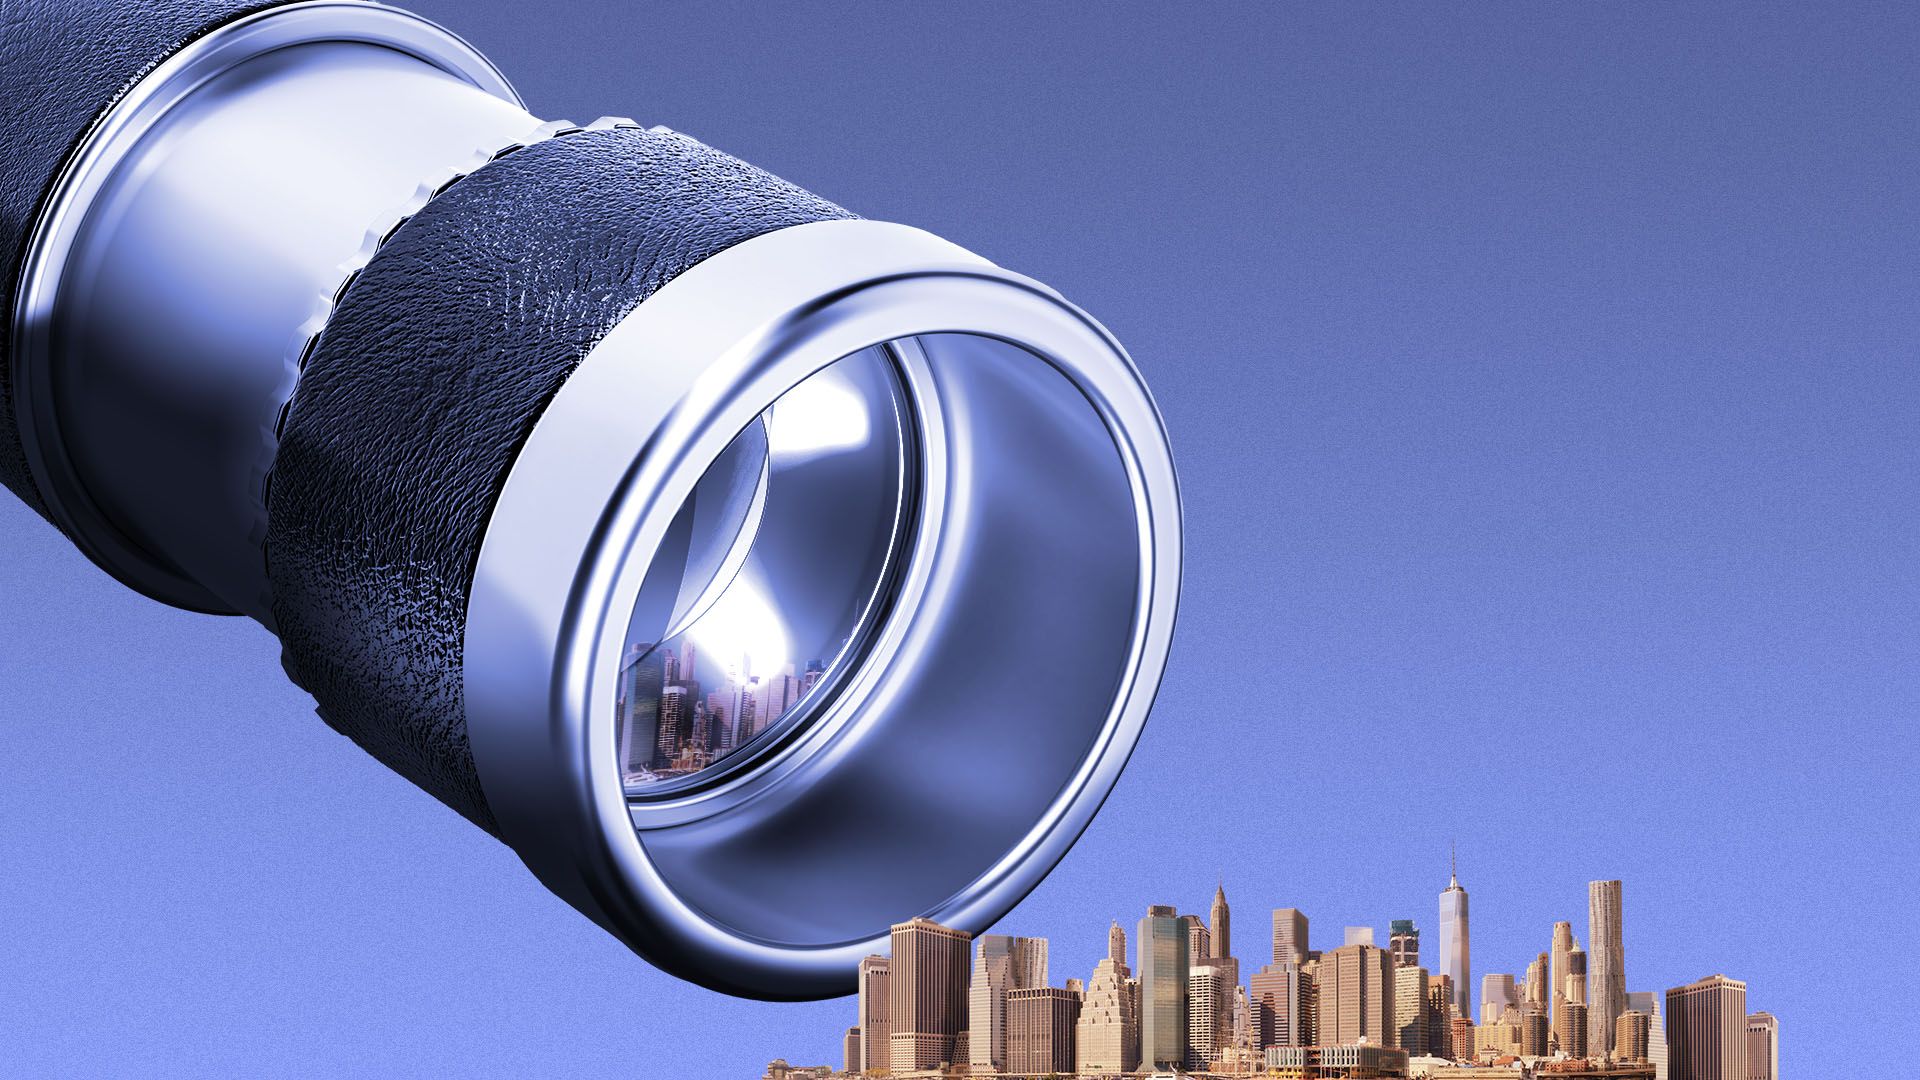 Illustration of a giant telescope lens looking at a tiny city